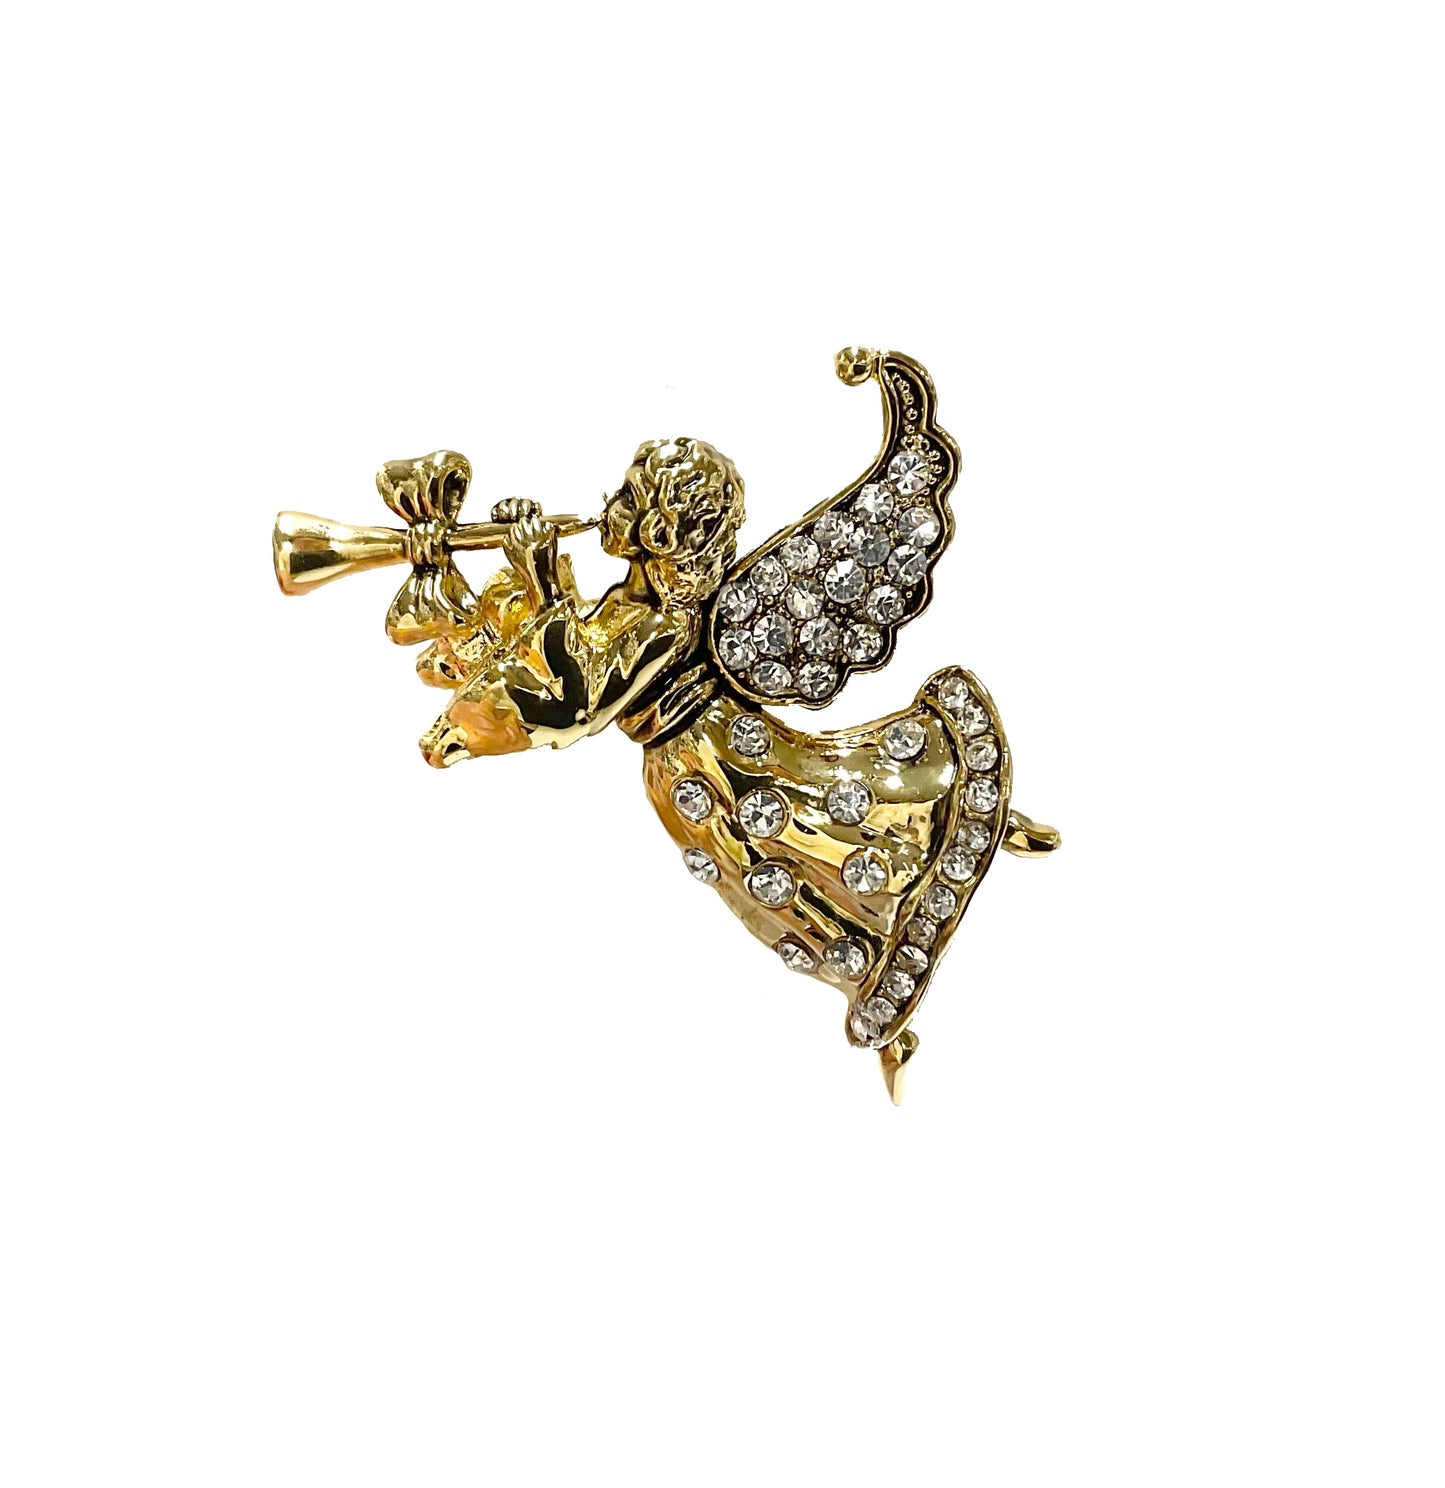 Angel with Trumpet Pin #24-255GD